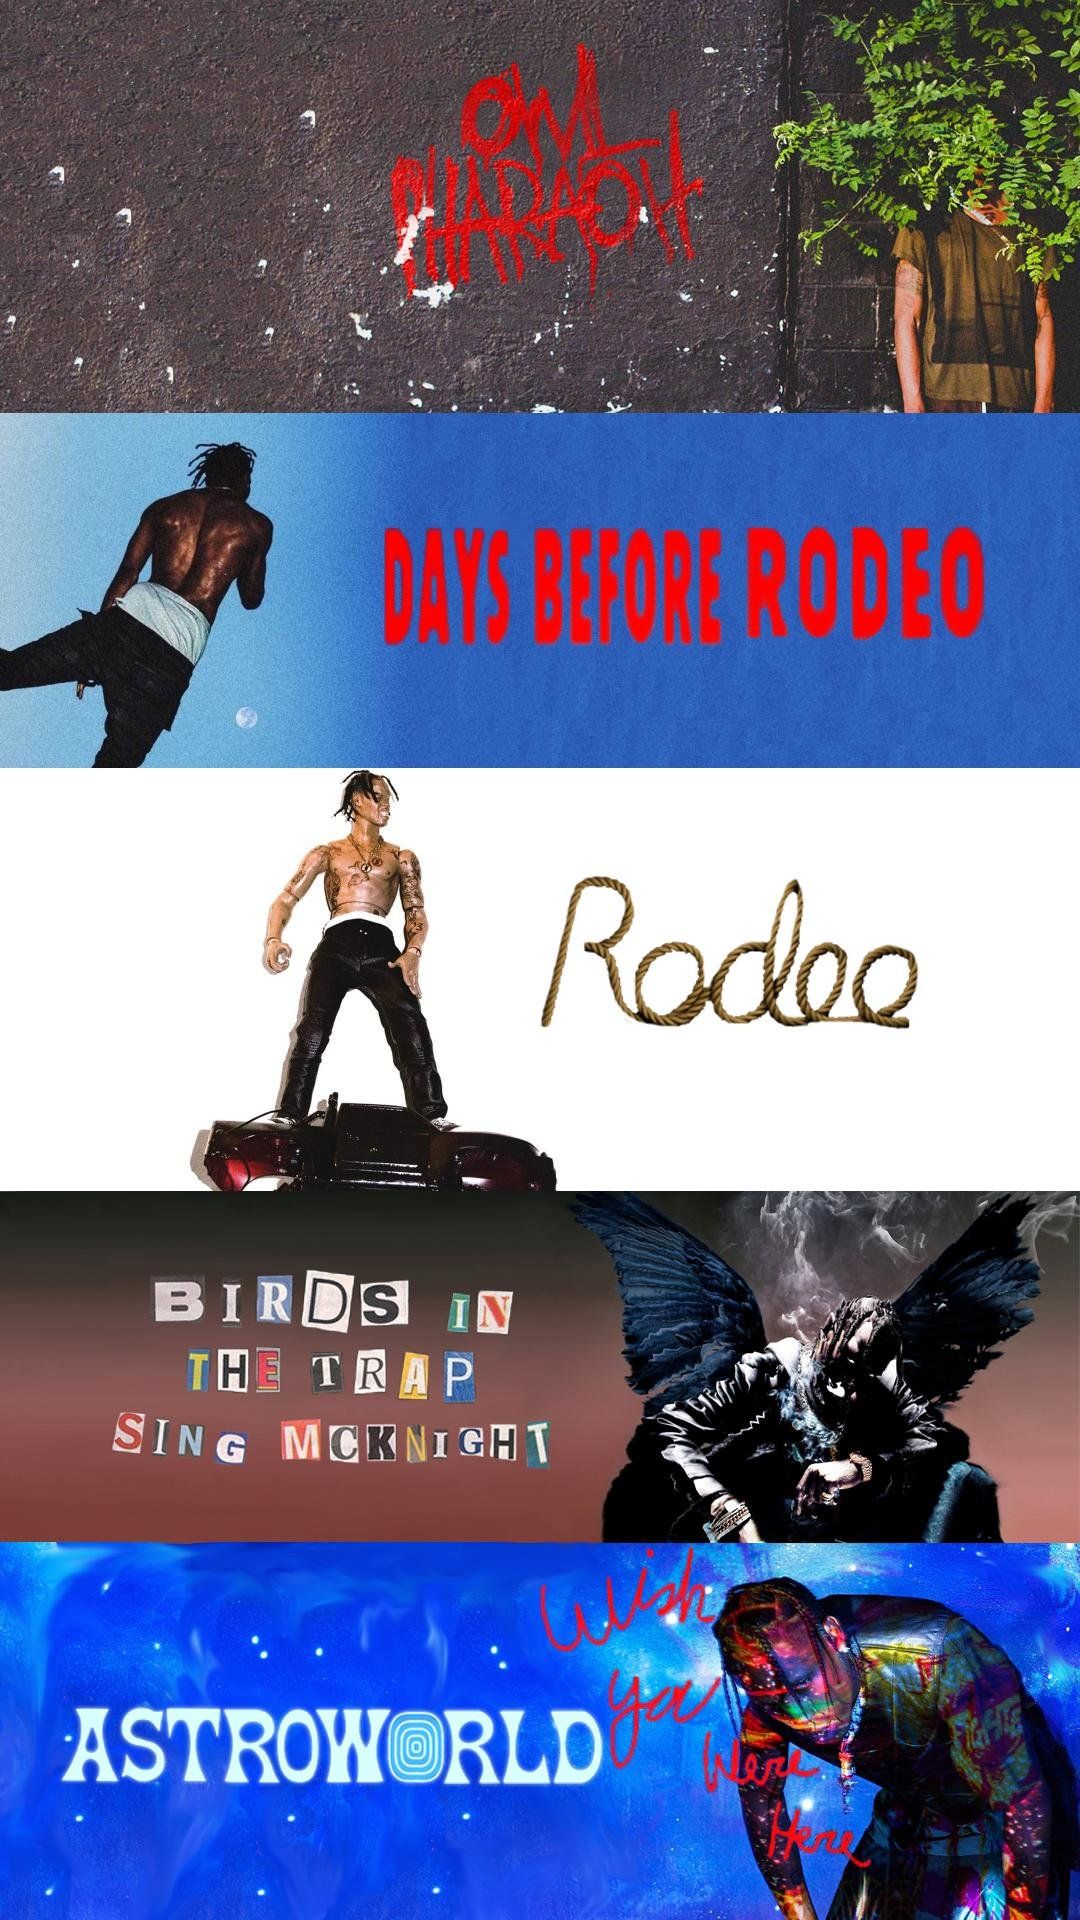 days before rodeo download